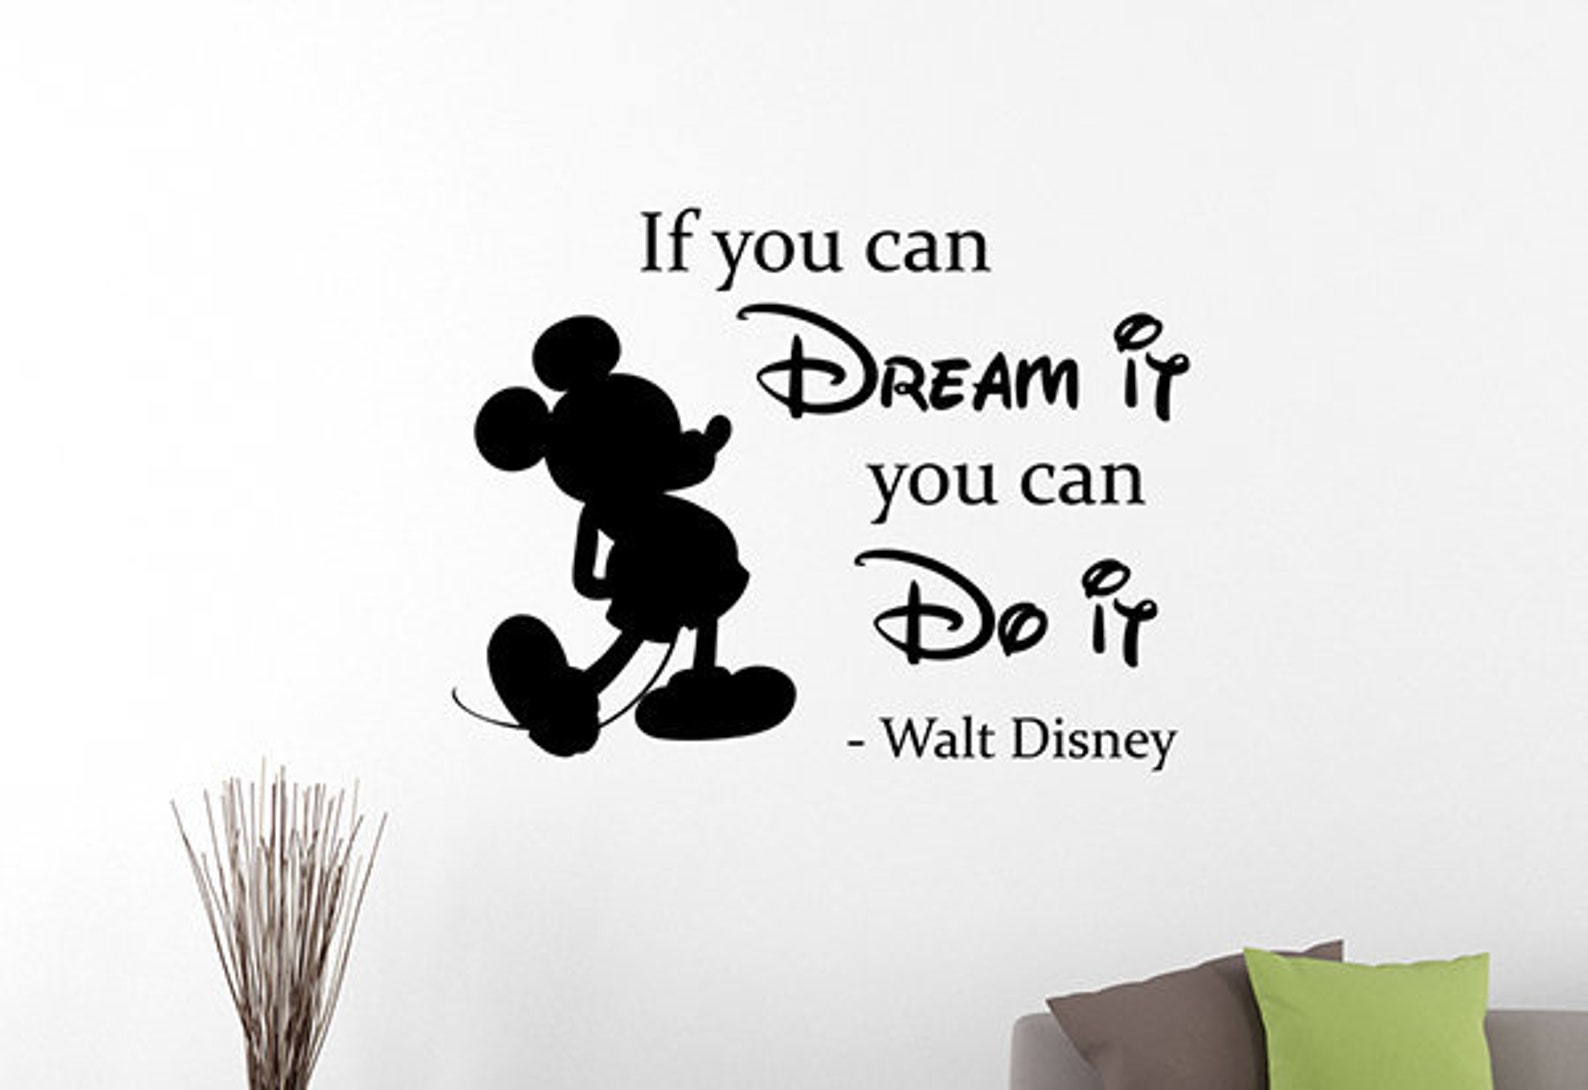 Can you do my back. If you can Dream it you can do it Walt Disney. Уолт Дисней цитаты. У. Дисней цитаты на английском. You can do it красивым шрифтом.